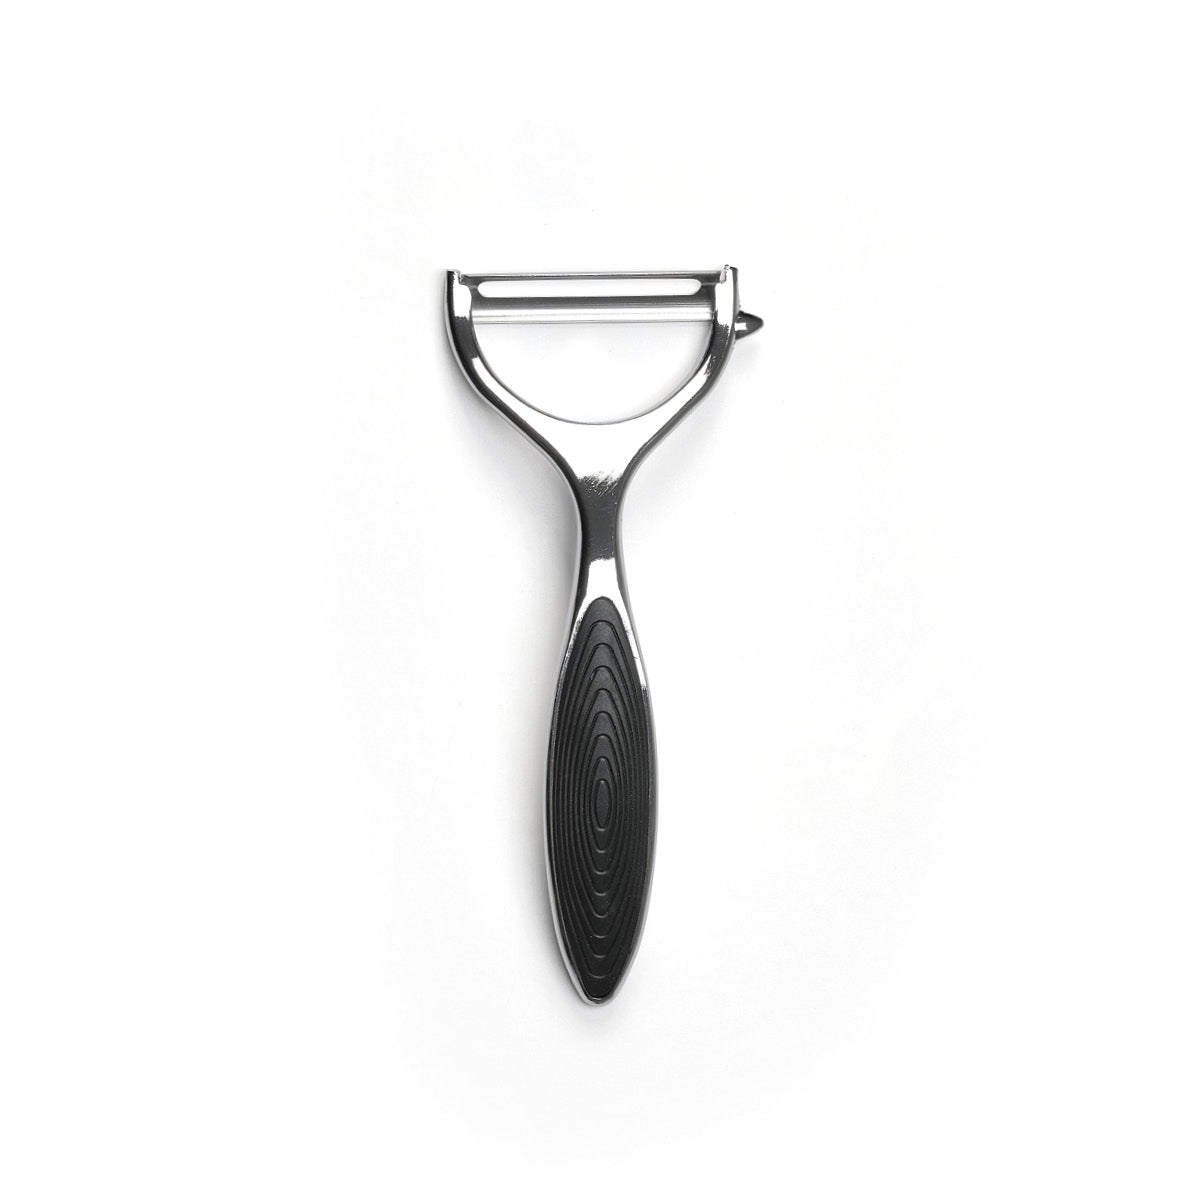 Y-Peeler with soft touch in stainless steel - grey/black